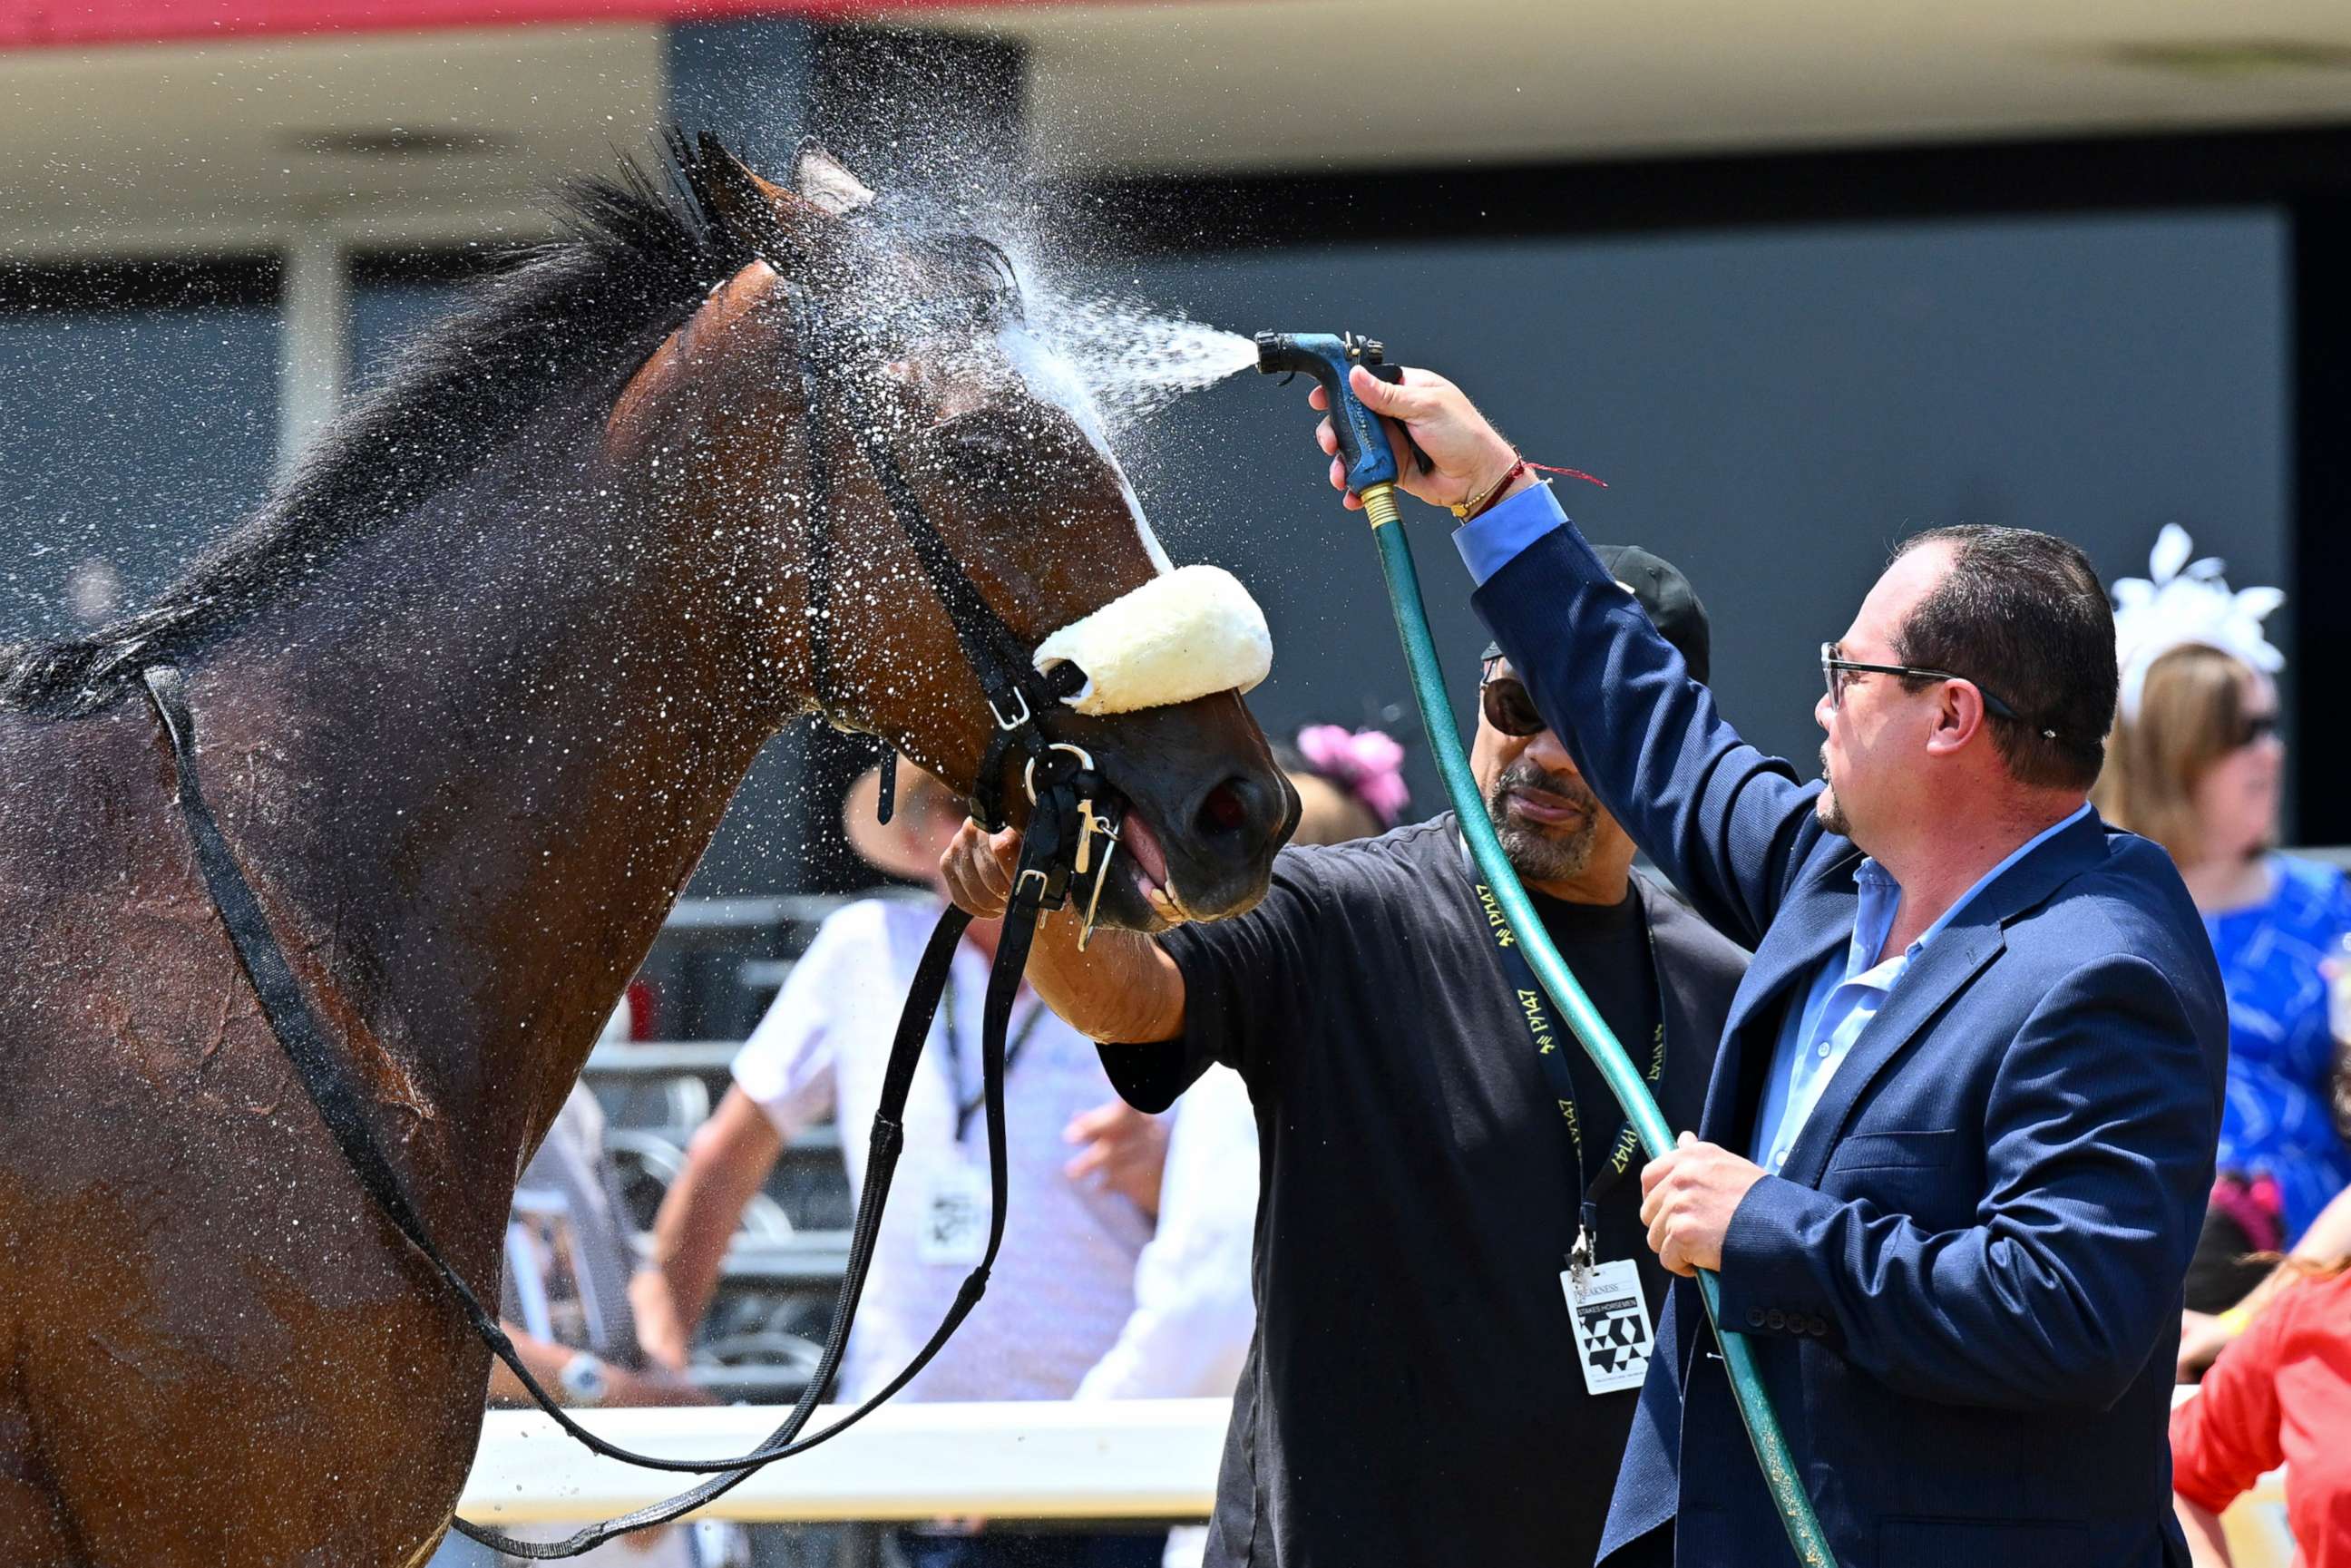 PHOTO: A horse is doused after competing in a turf race prior to the 147th running of the Preakness Stakes horse race at Pimlico Race Course, May 21, 2022, in Baltimore.